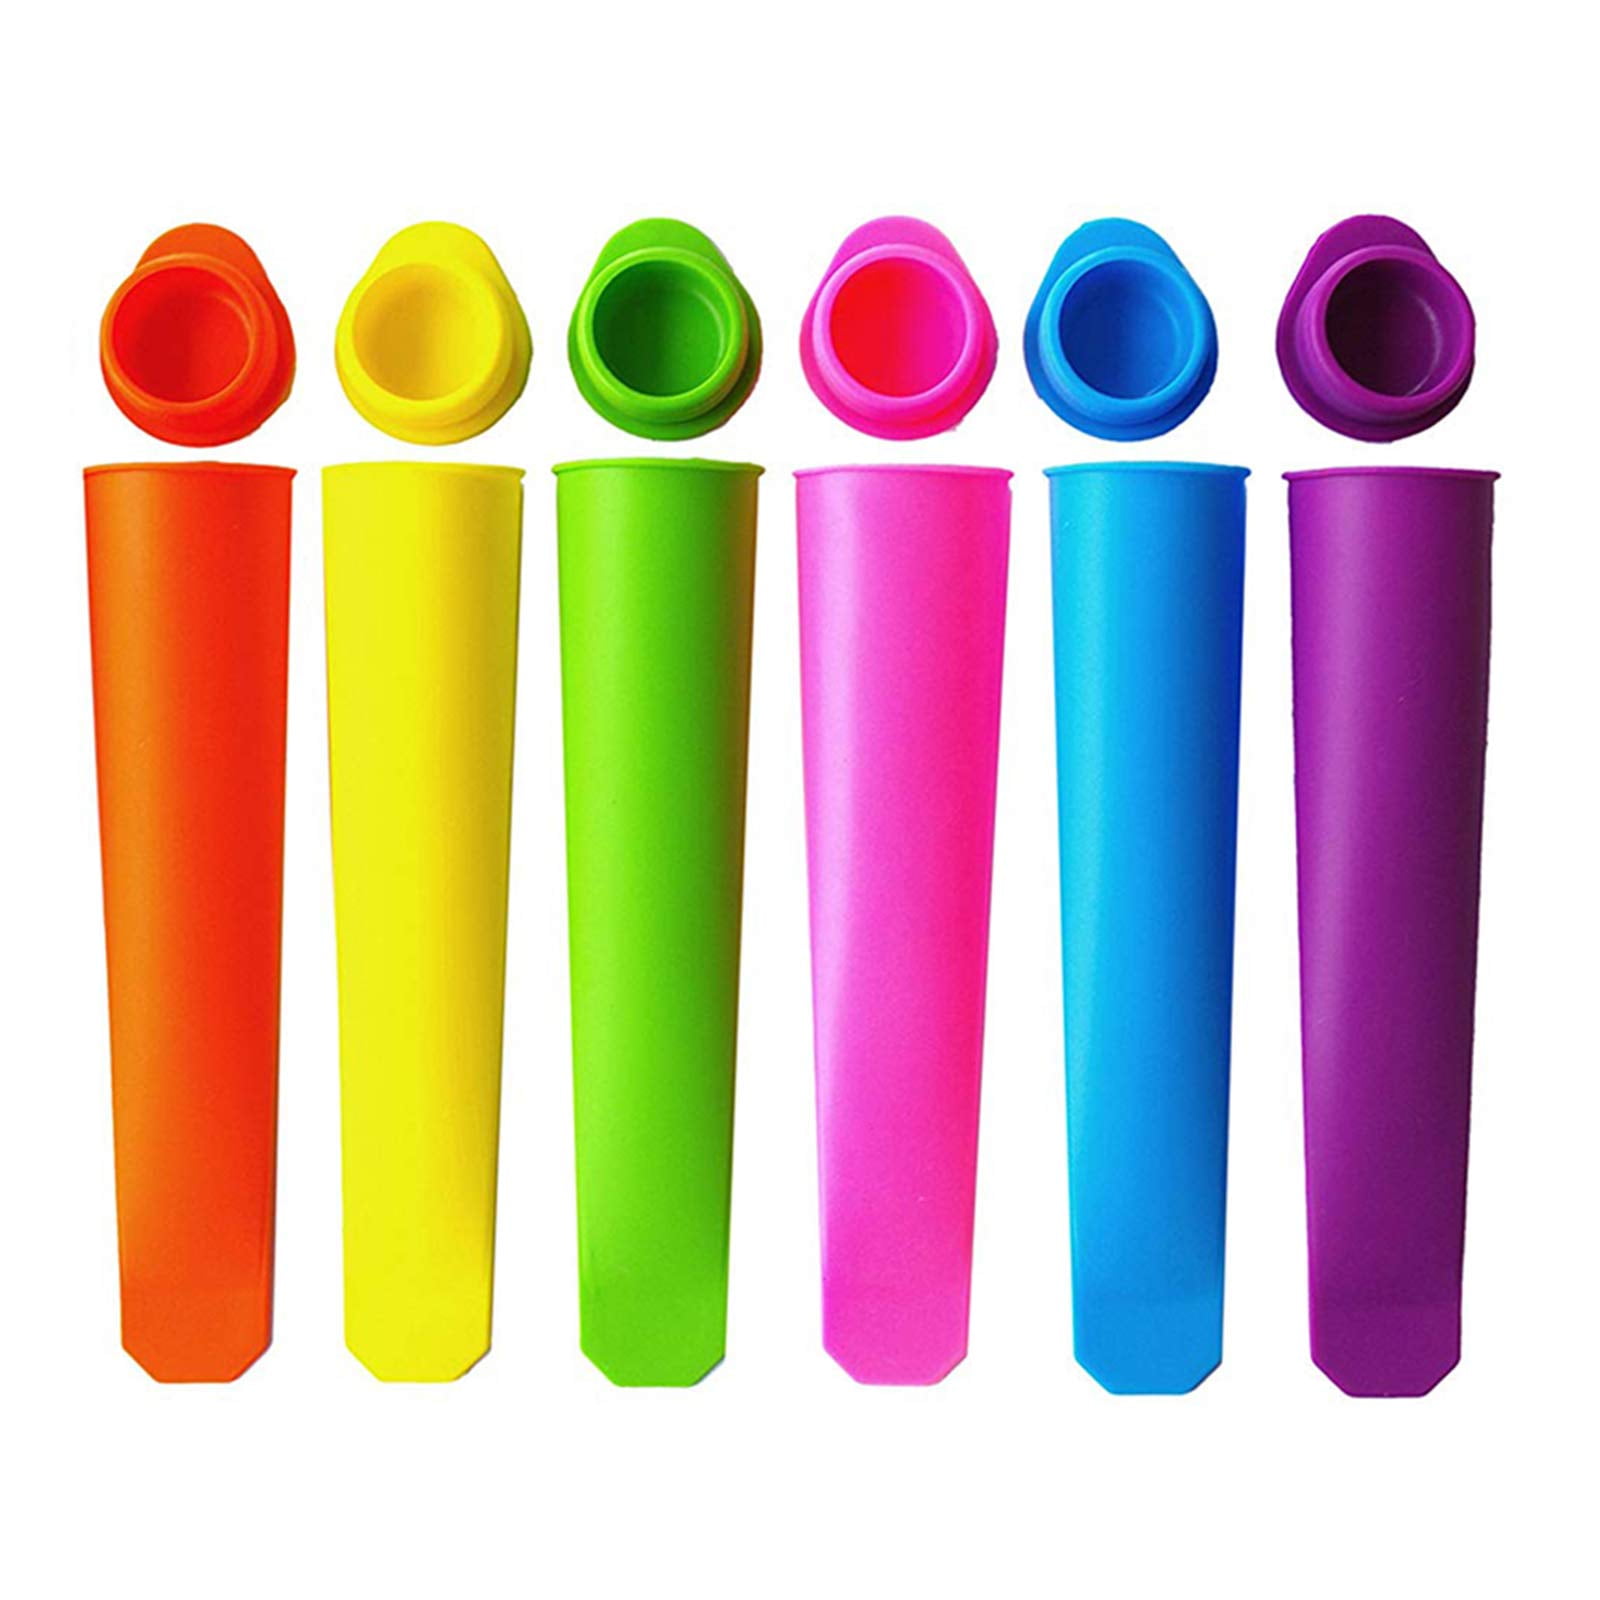 6Pcs Silicone Frozen Ice Cream Mold Juice Popsicle Maker Ice Lolly Pop DIY-Mould